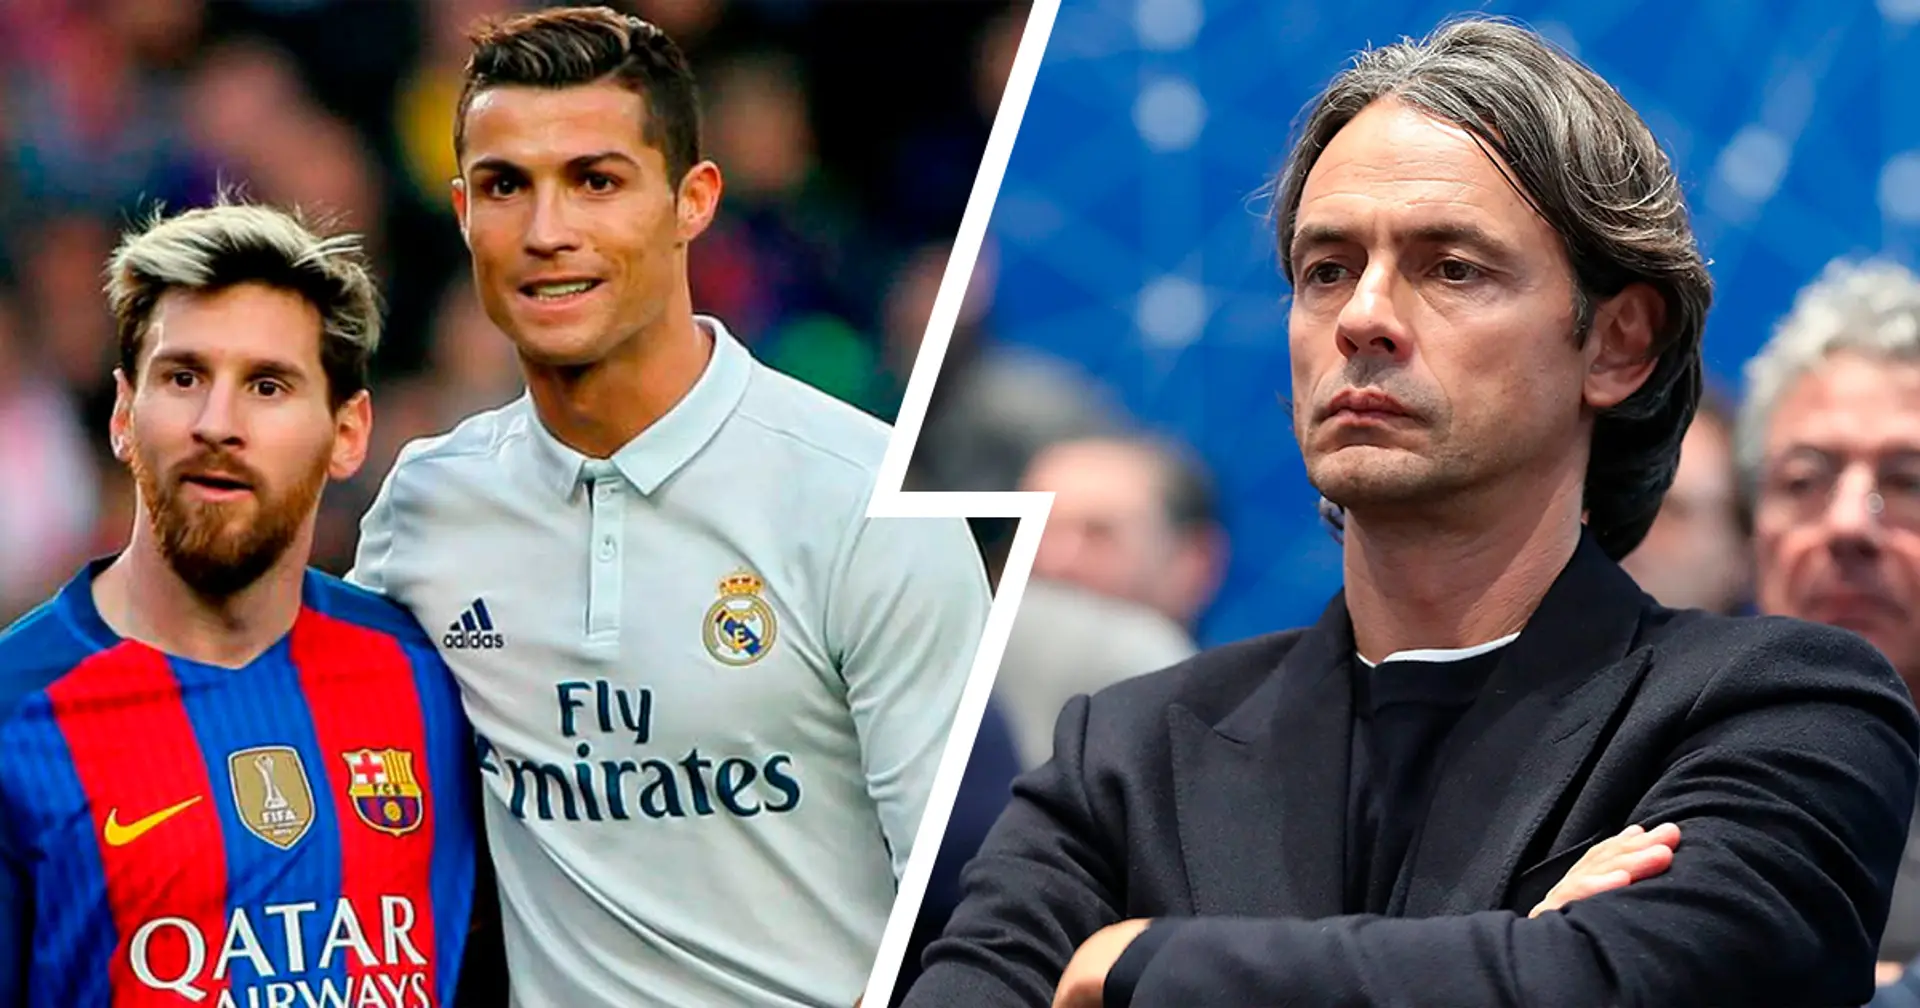 Milan legend Filippo Inzaghi explains why he's 'a little bit angry' about Cristiano Ronaldo's and Lionel Messi's goalscoring records